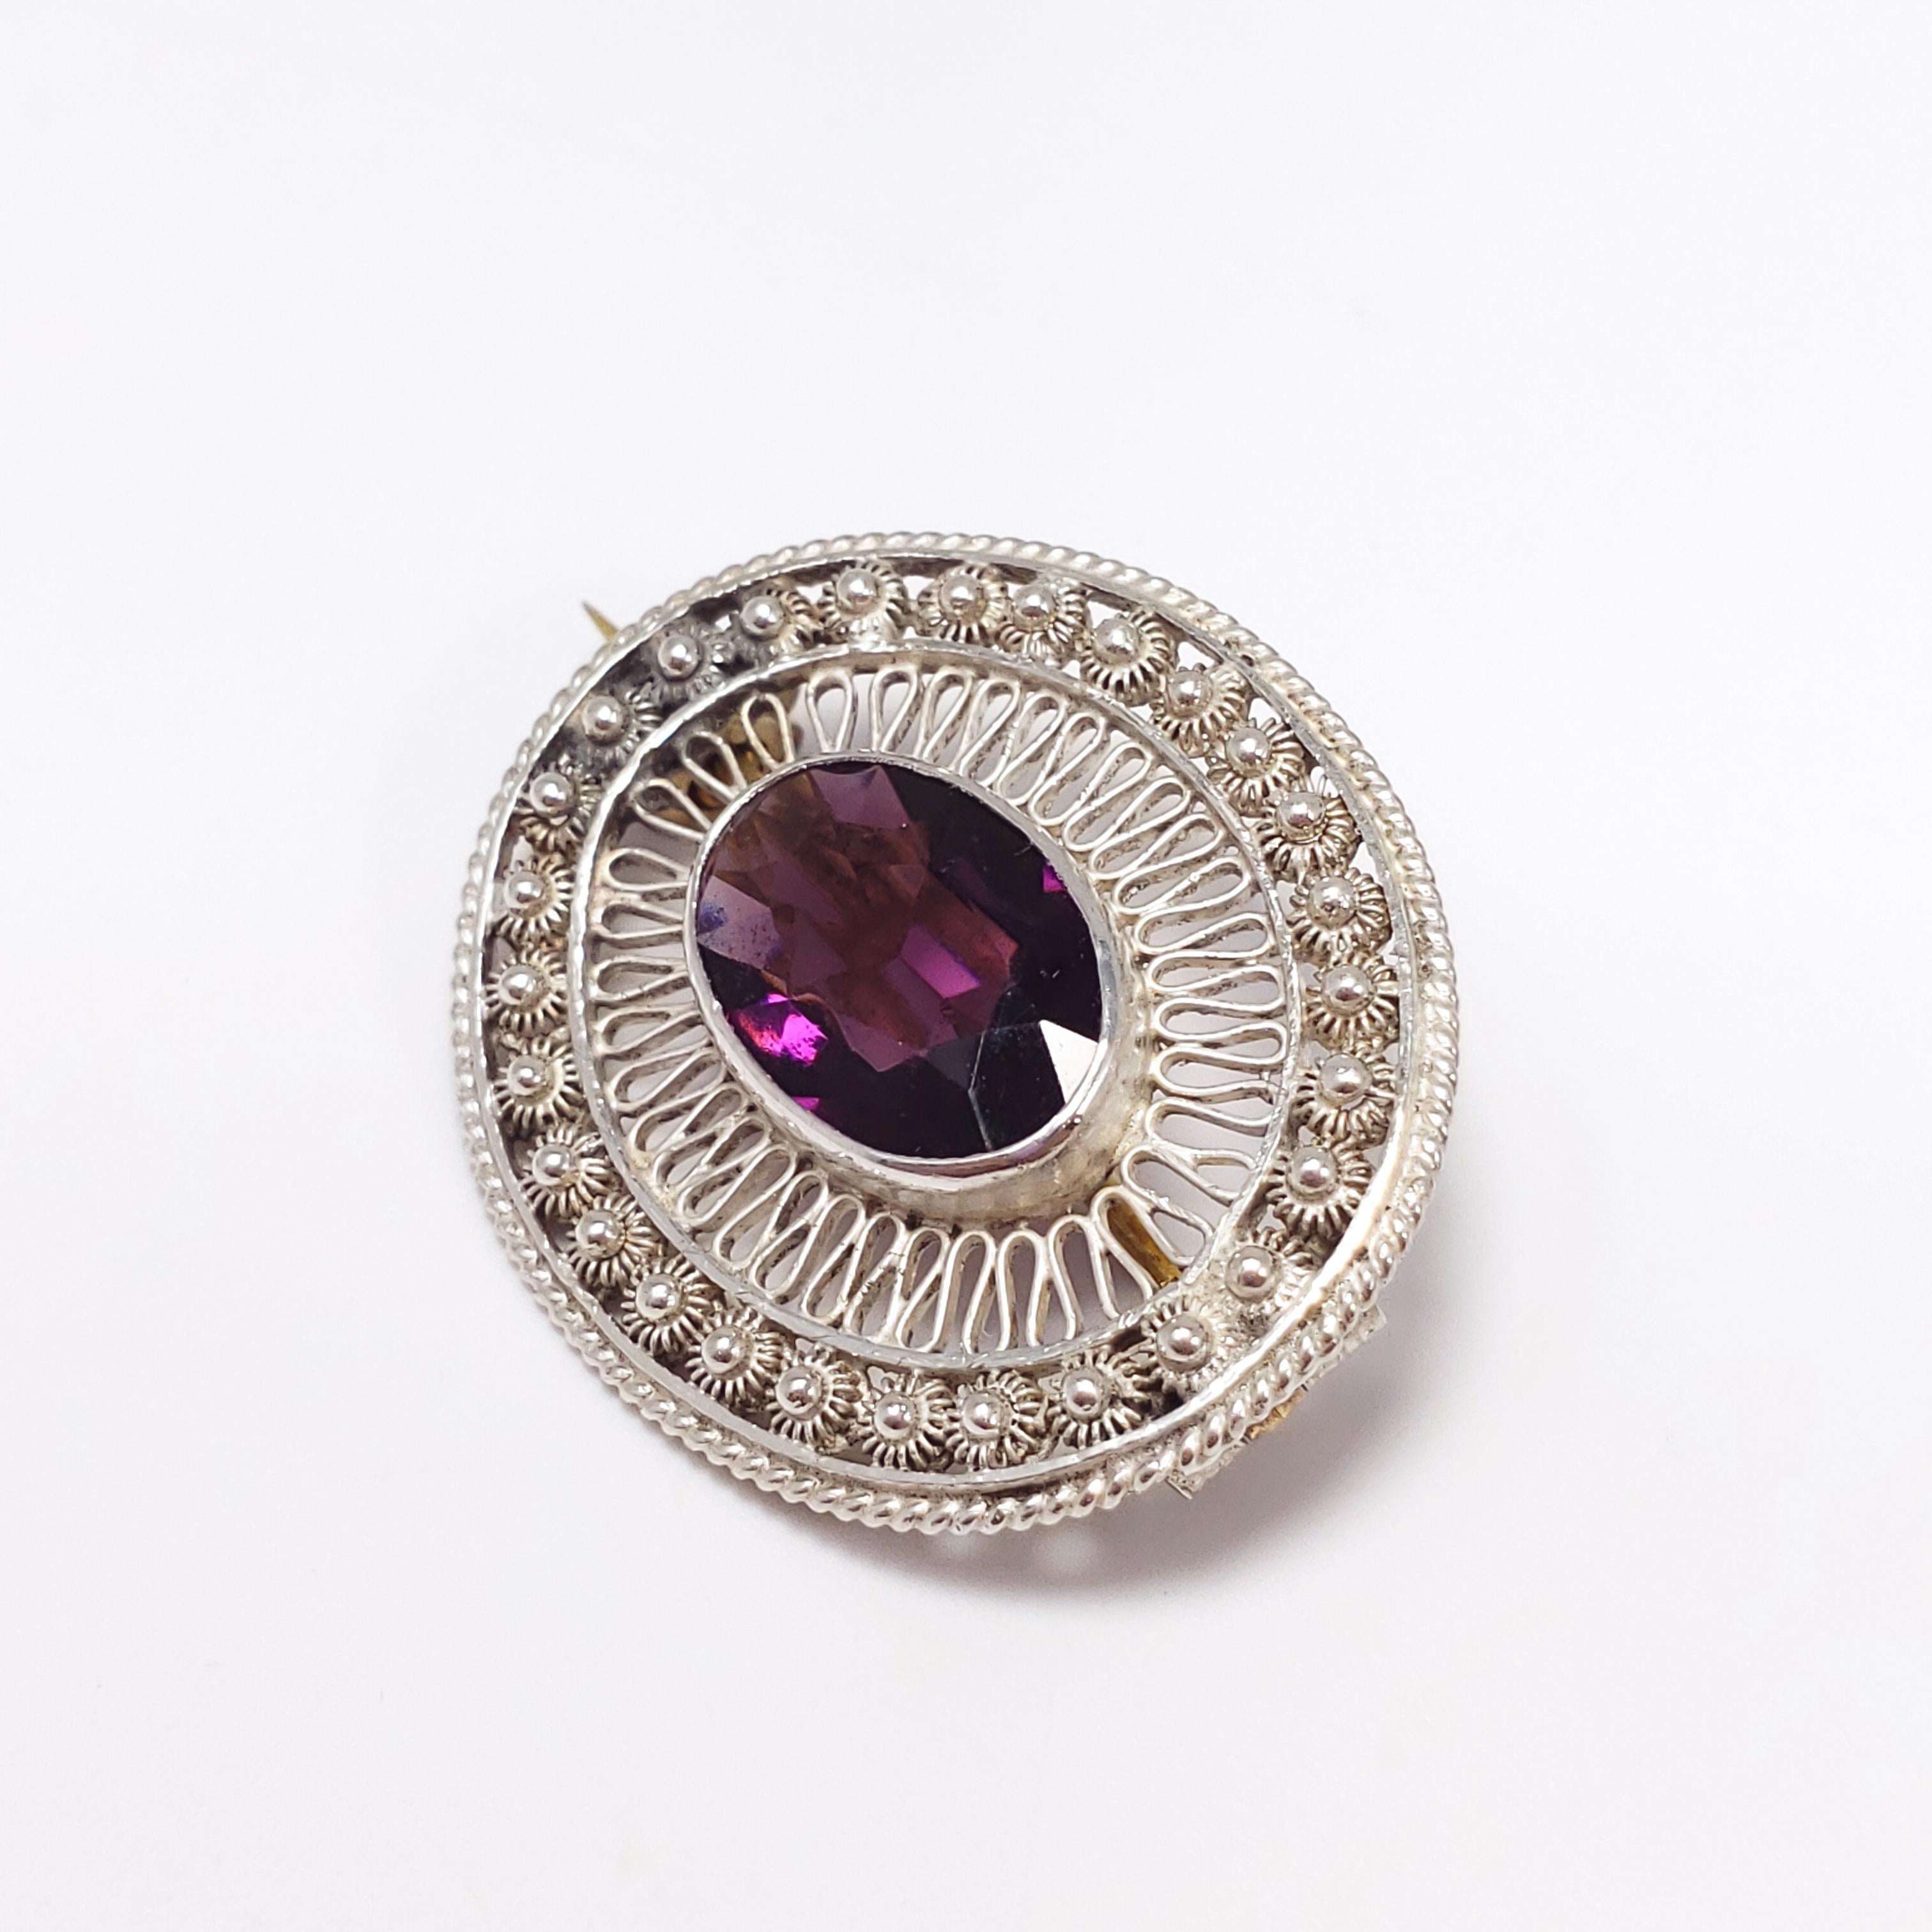 An amethyst open-back crystal sits in a meticulously designed sterling silver filigree-style setting, accented with decorative motifs. Features brass fastening hardware on the back. A gorgeous Victorian pin/brooch!

Dimensions: W 2.7 x L 2.2